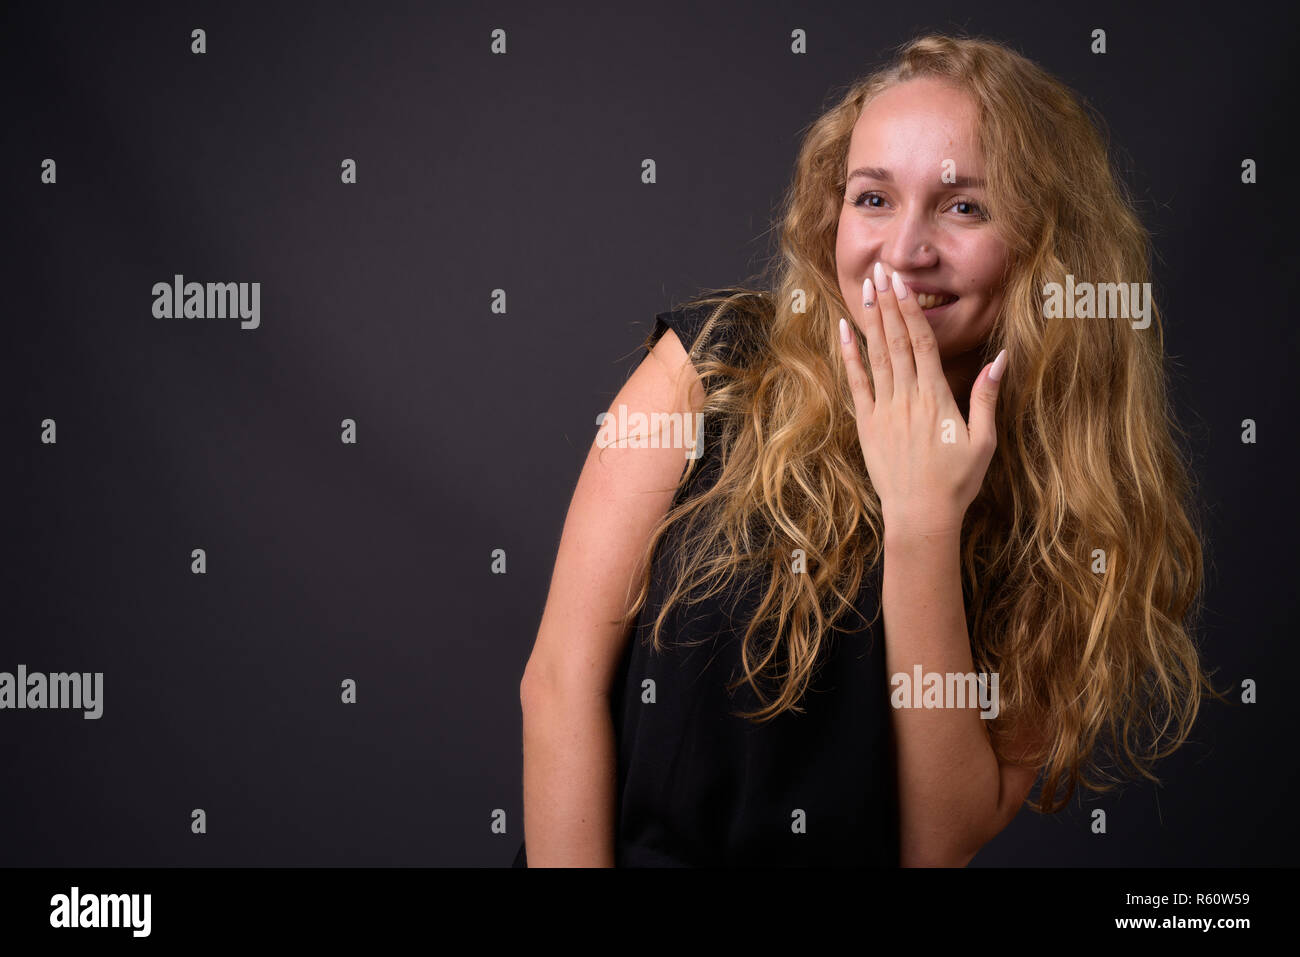 Young beautiful businesswoman with long wavy blond hair laughing Stock Photo